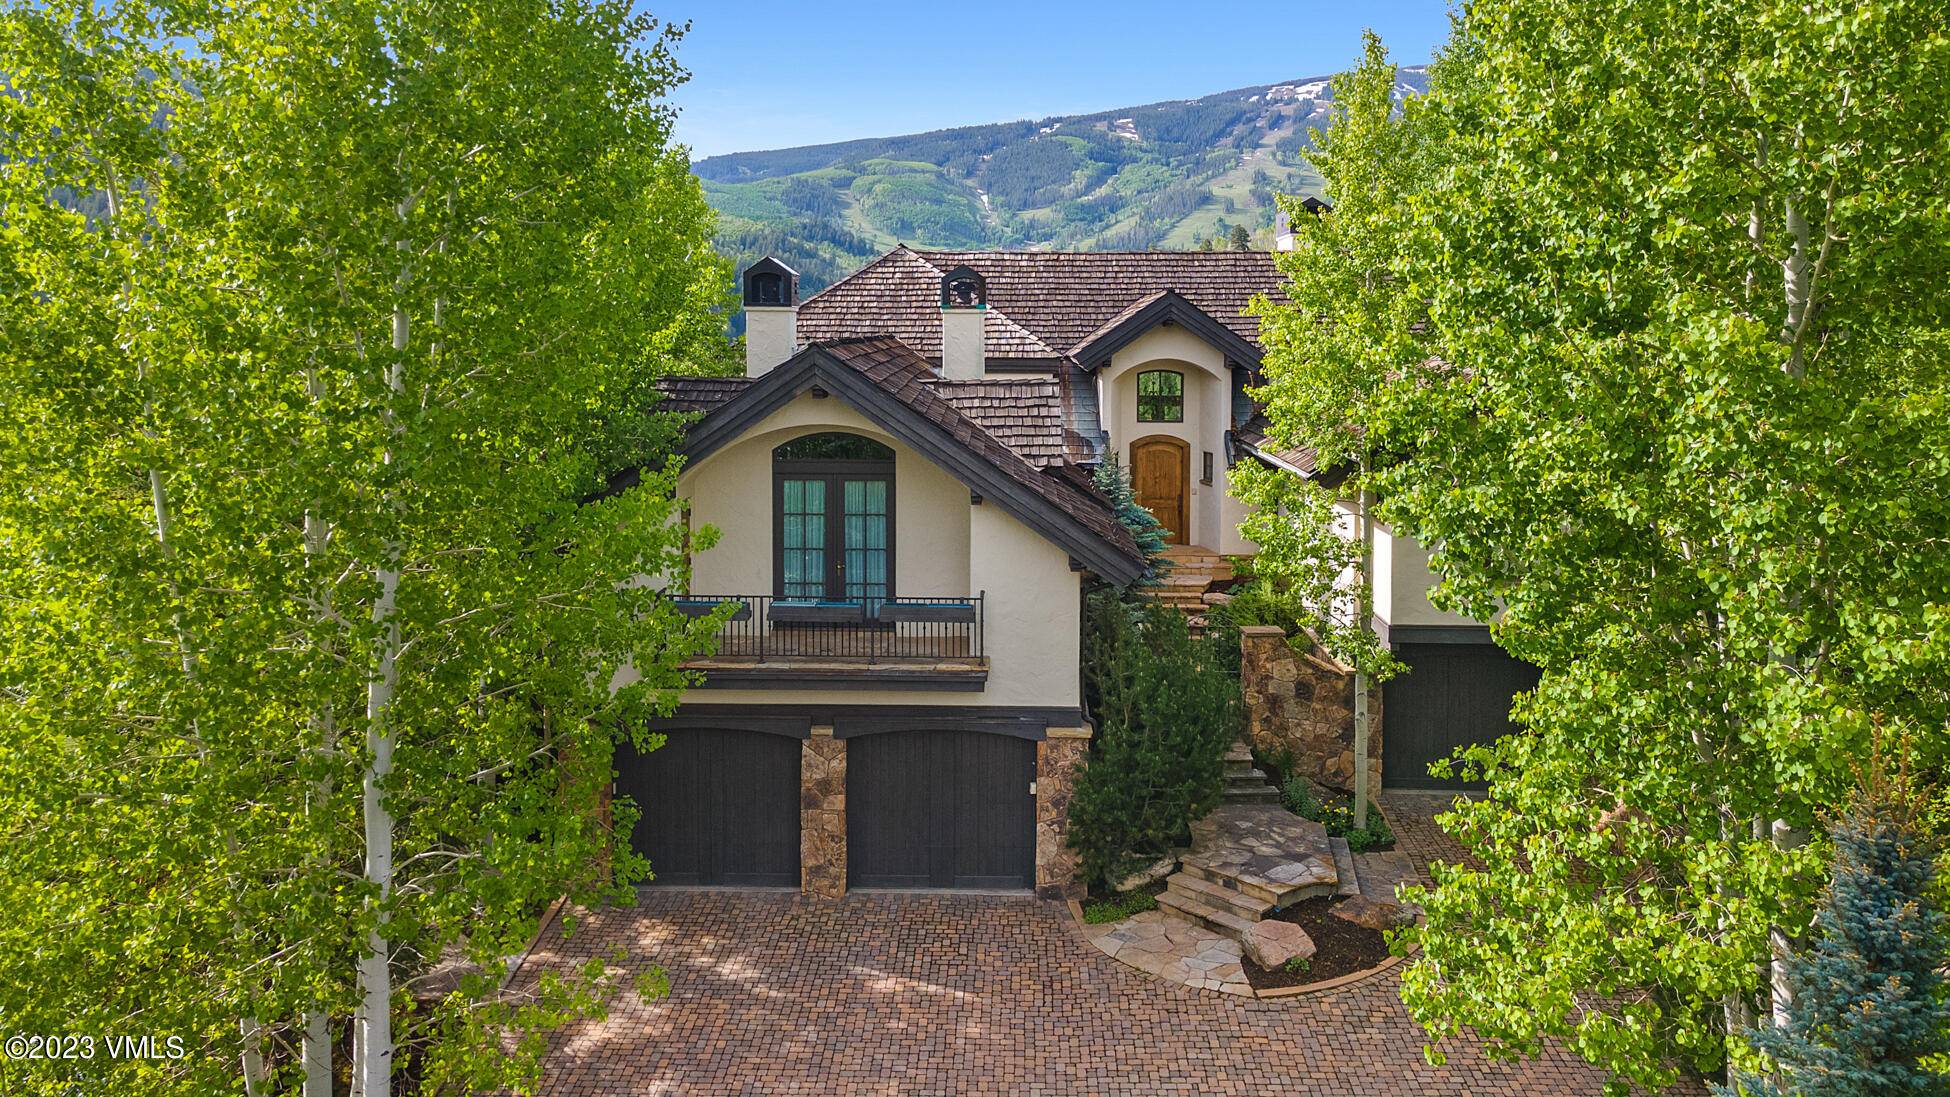 This stunning property boasts breathtaking views of the surrounding mountains and is situated in a prime location with easy access to world class skiing, hiking, and outdoor adventures.